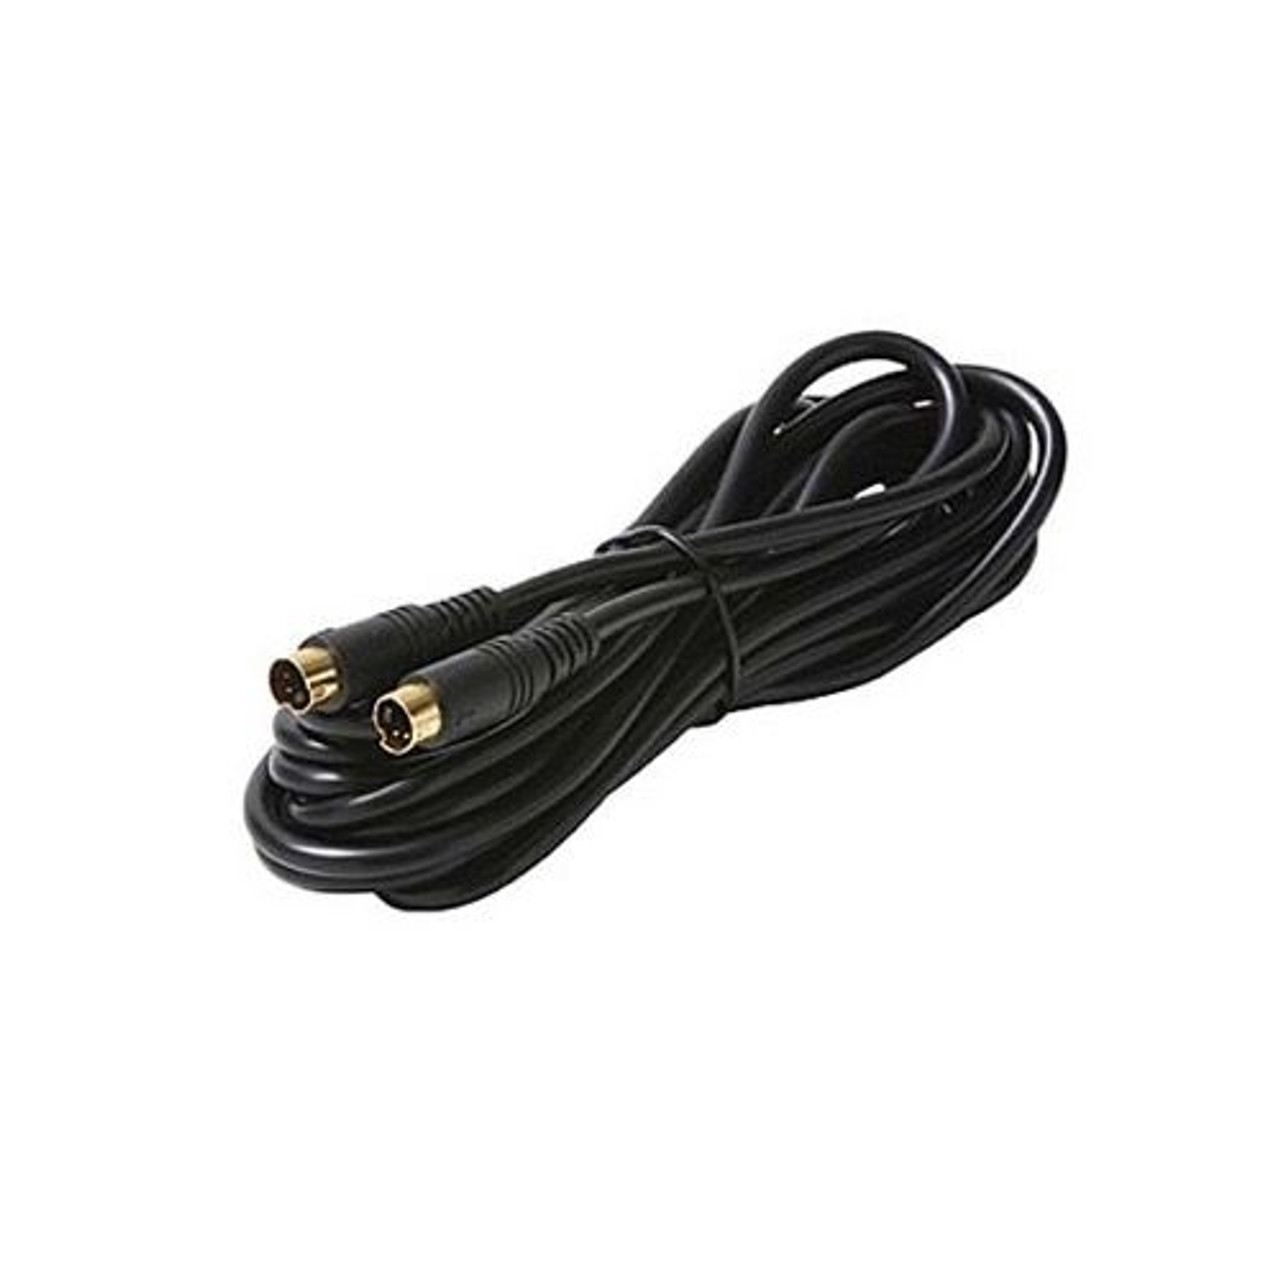 Steren 255-208 50' FT S-Video VHS to S-Video Cable with Gold Plated Din Each Ends Shielded Digital Video Cable TV Connection Cord Premium Output Input Hook-Up Jacks, Part # 255208